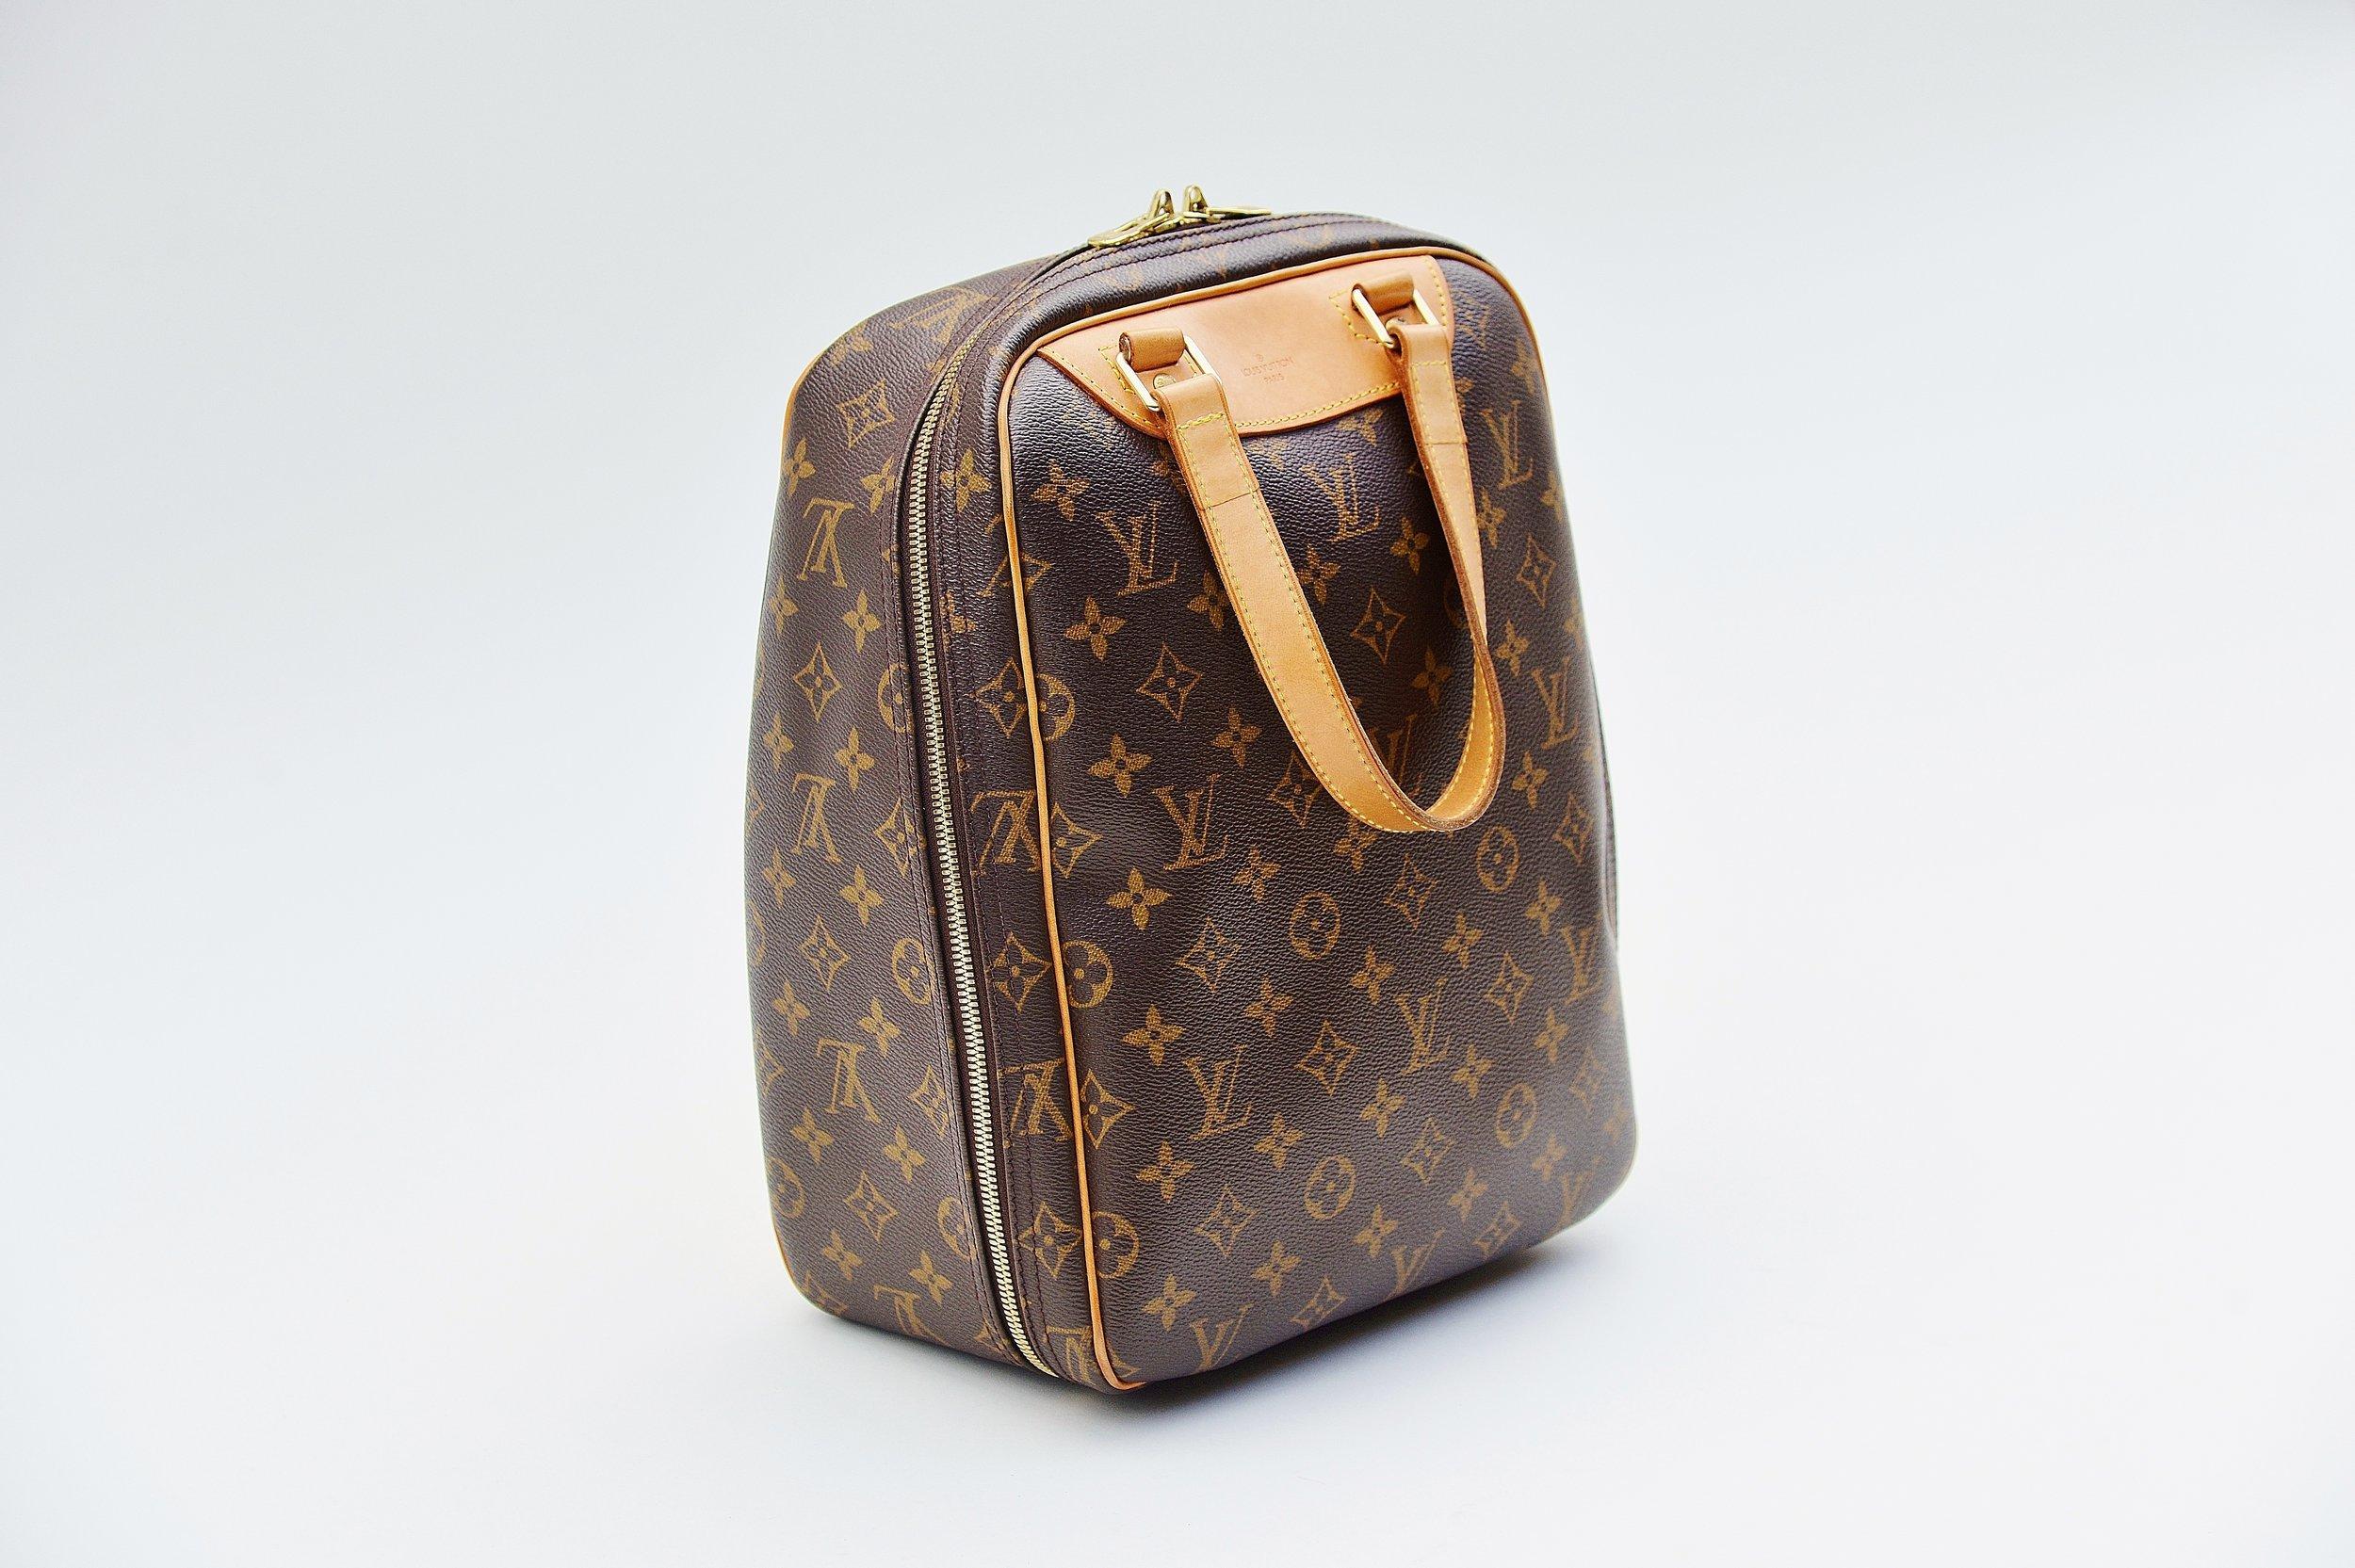 From the collection of Savineti we offer this Louis Vuitton Excursion shoe bag :
-	Brand: Louis Vuitton
-	Model: Excursion shoe bag
-	Year: 2003
-	Serial Number: VI1013
-	Condition: Good
-	Materials: canvas & leather  
-       Length of the handle: